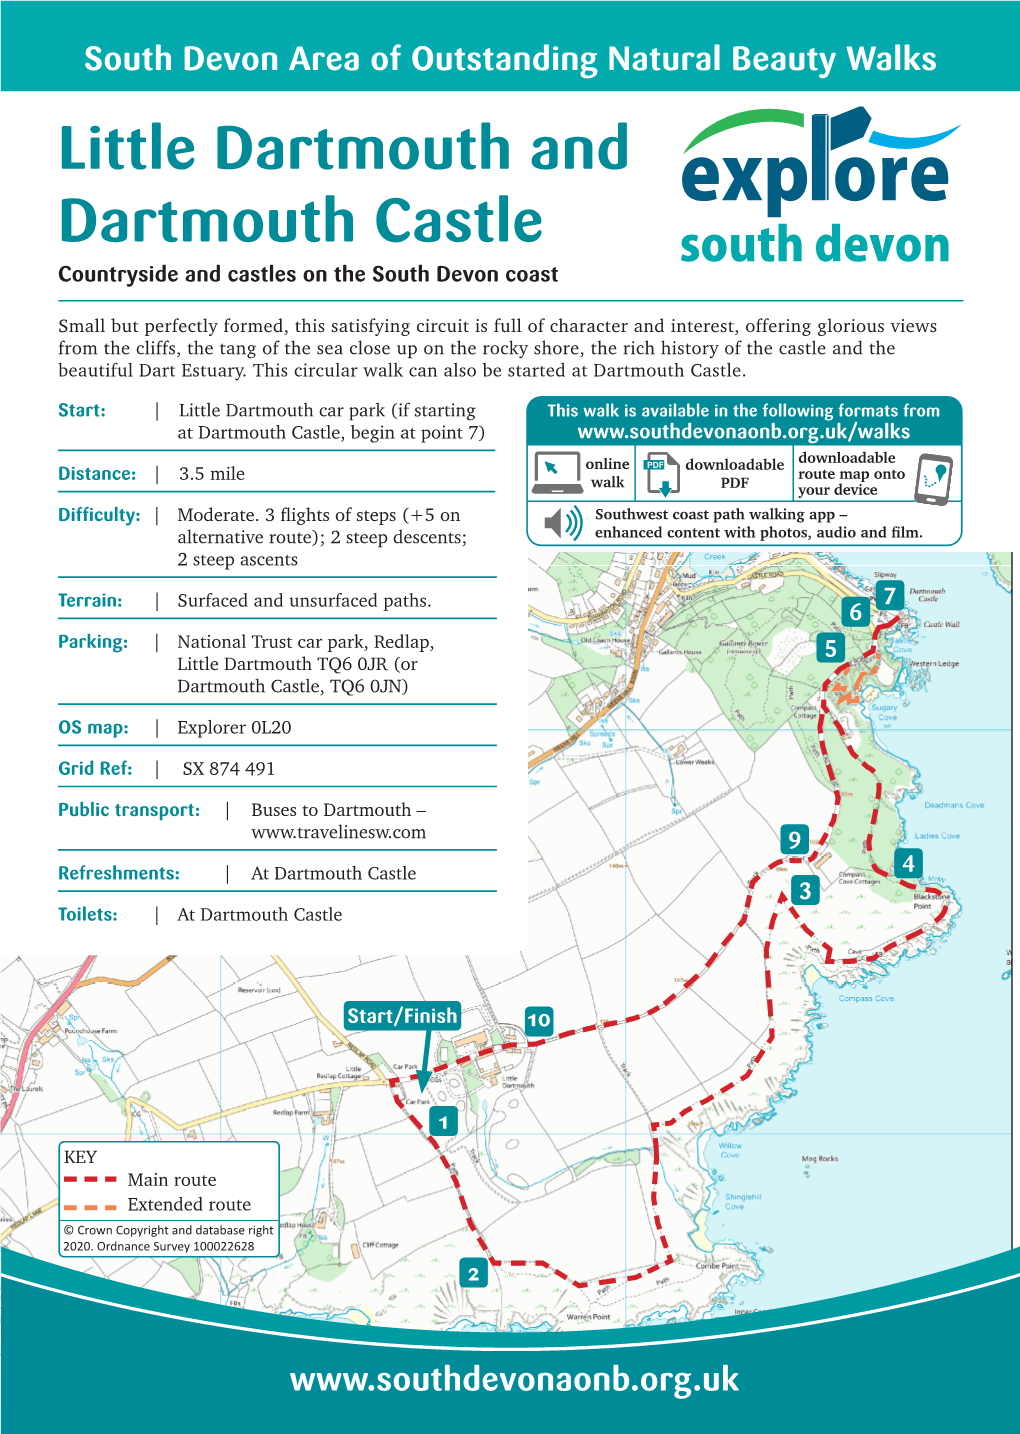 Exp Ore Countryside and Castles on the South Devon Coast South Devon